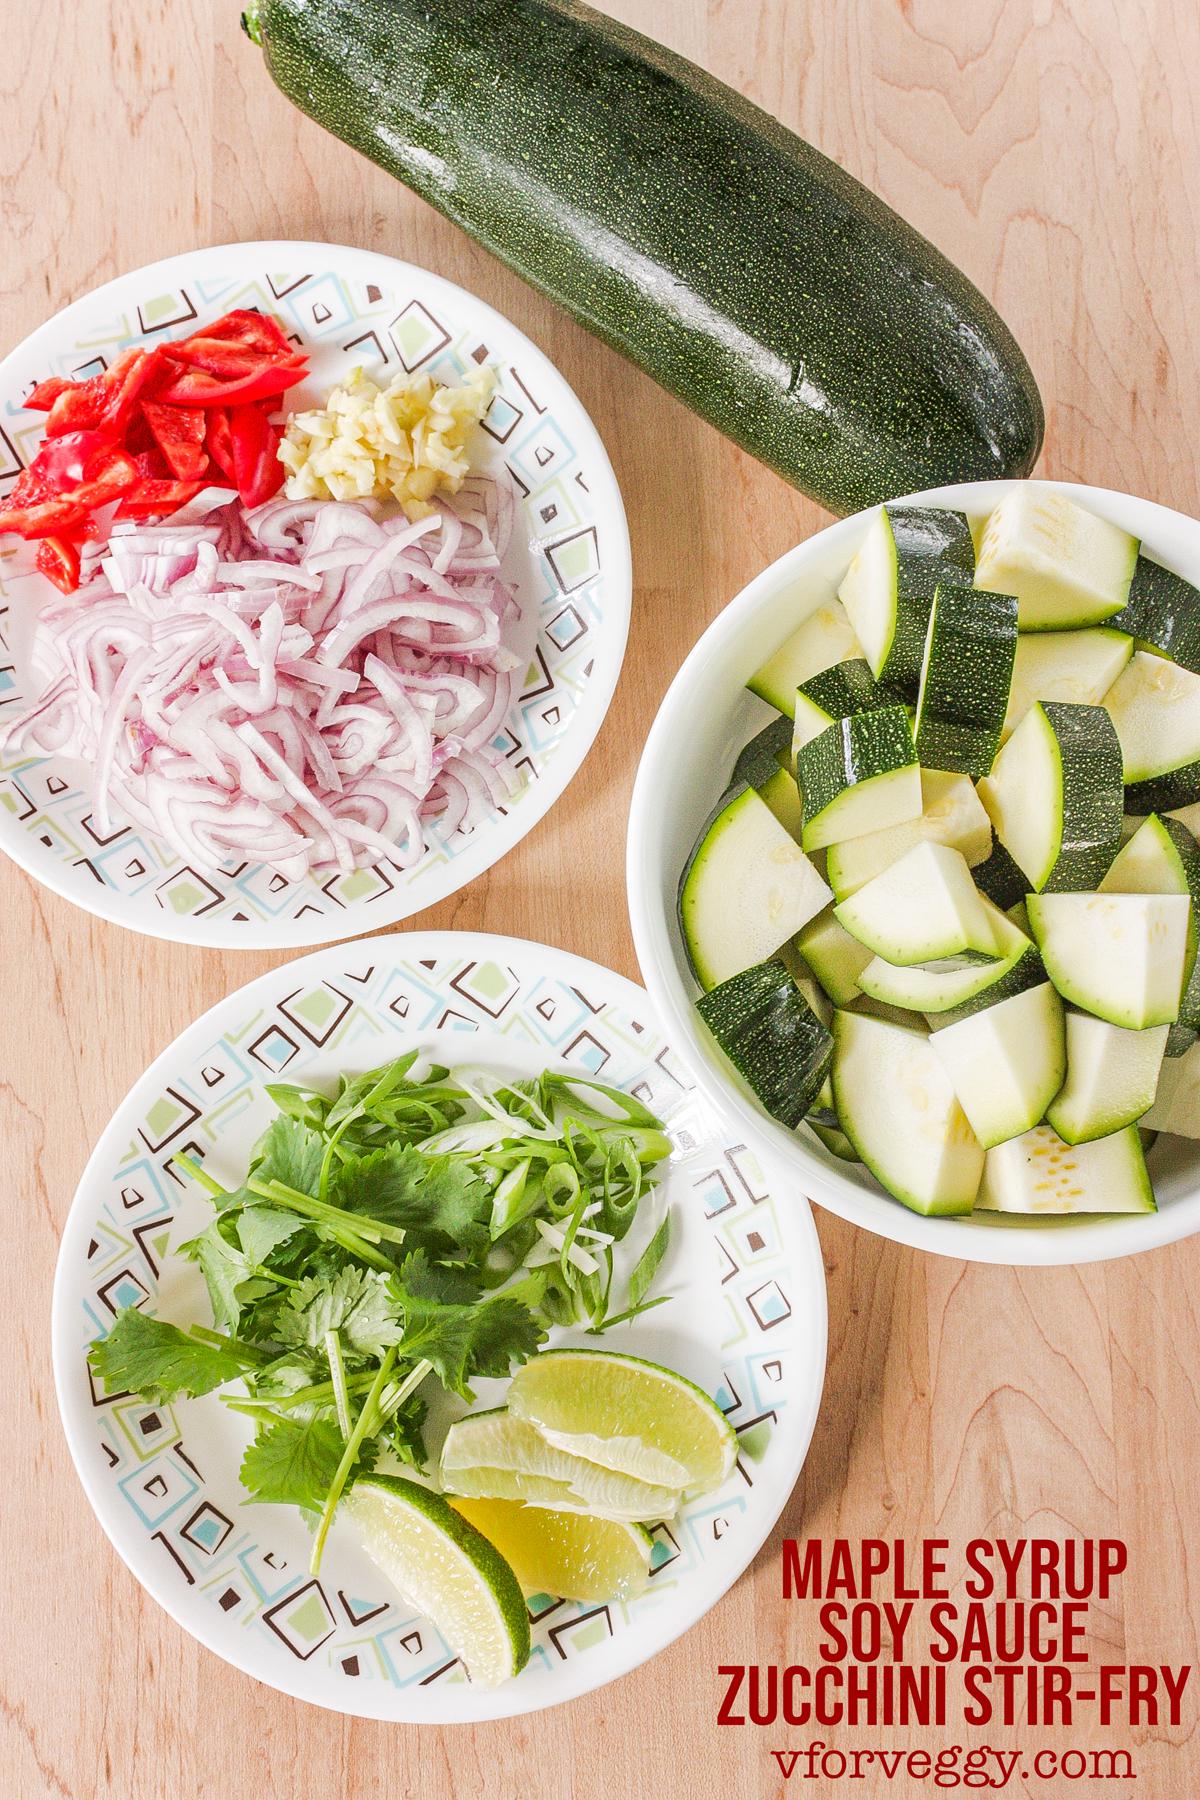 Ingredients for maple syrup soy sauce zucchini stir-fry: zucchini, red chilies, garlic, shallot, scallion, cilantro, and lime.